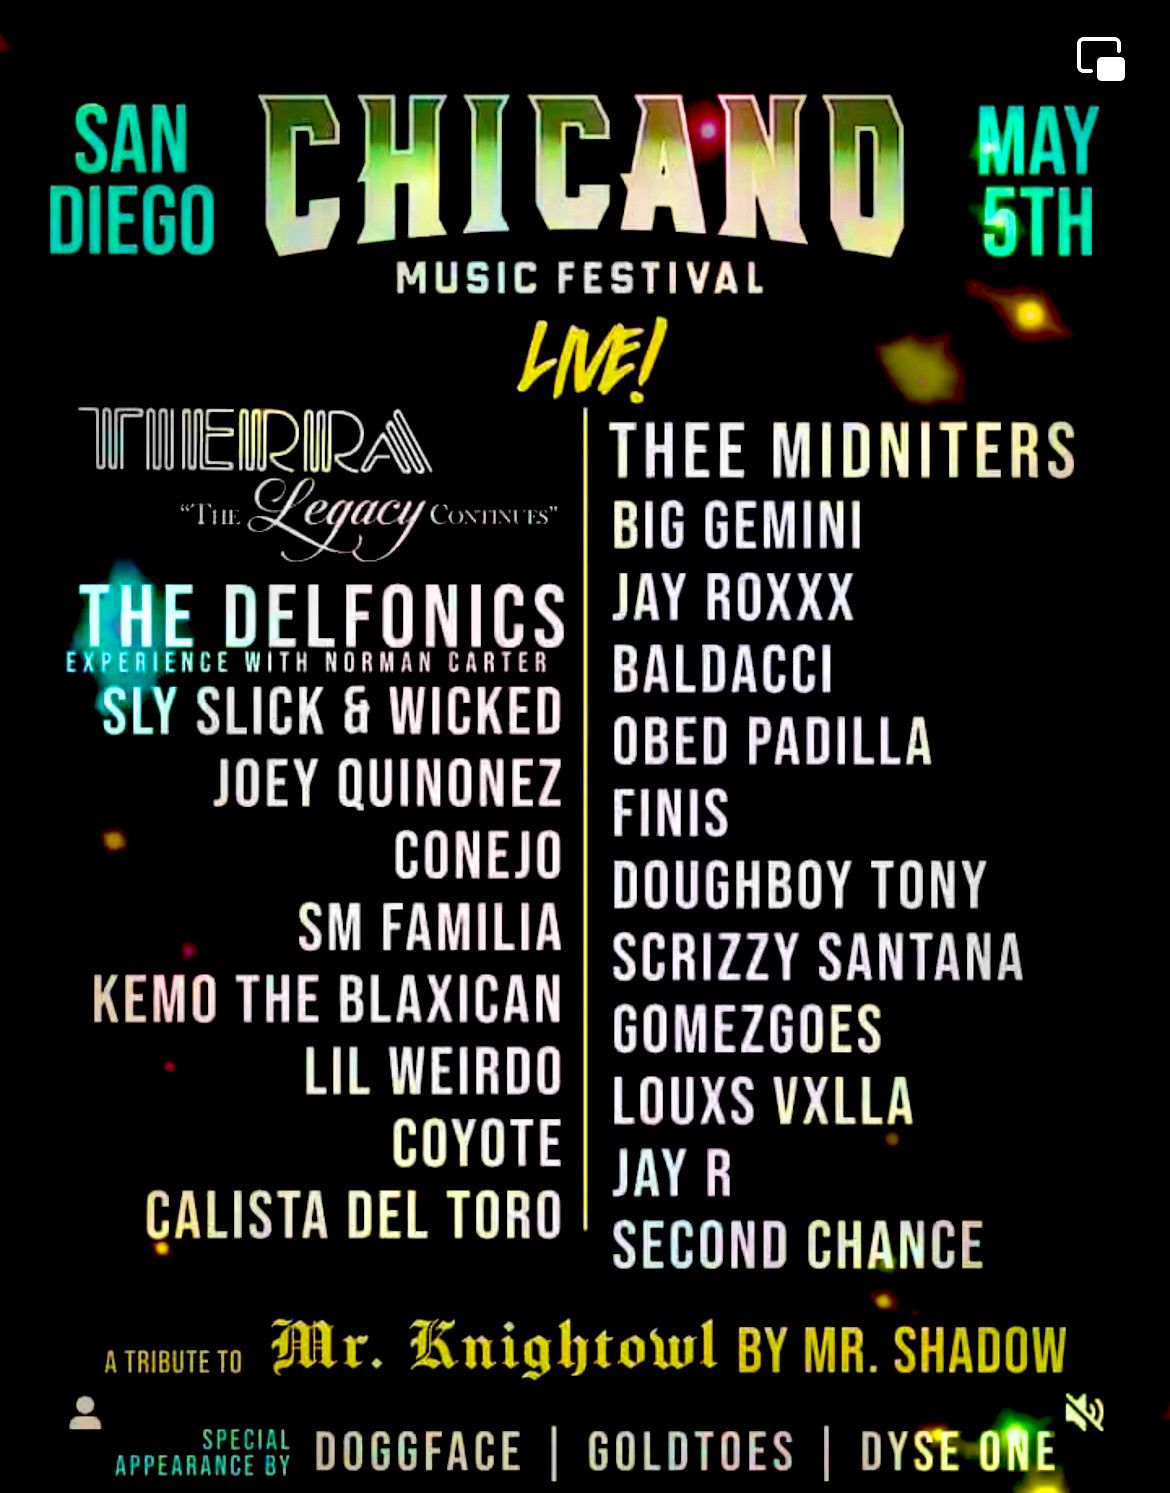 Chicano Music Festival TIERRA (The Legacy Continues)San Diego 